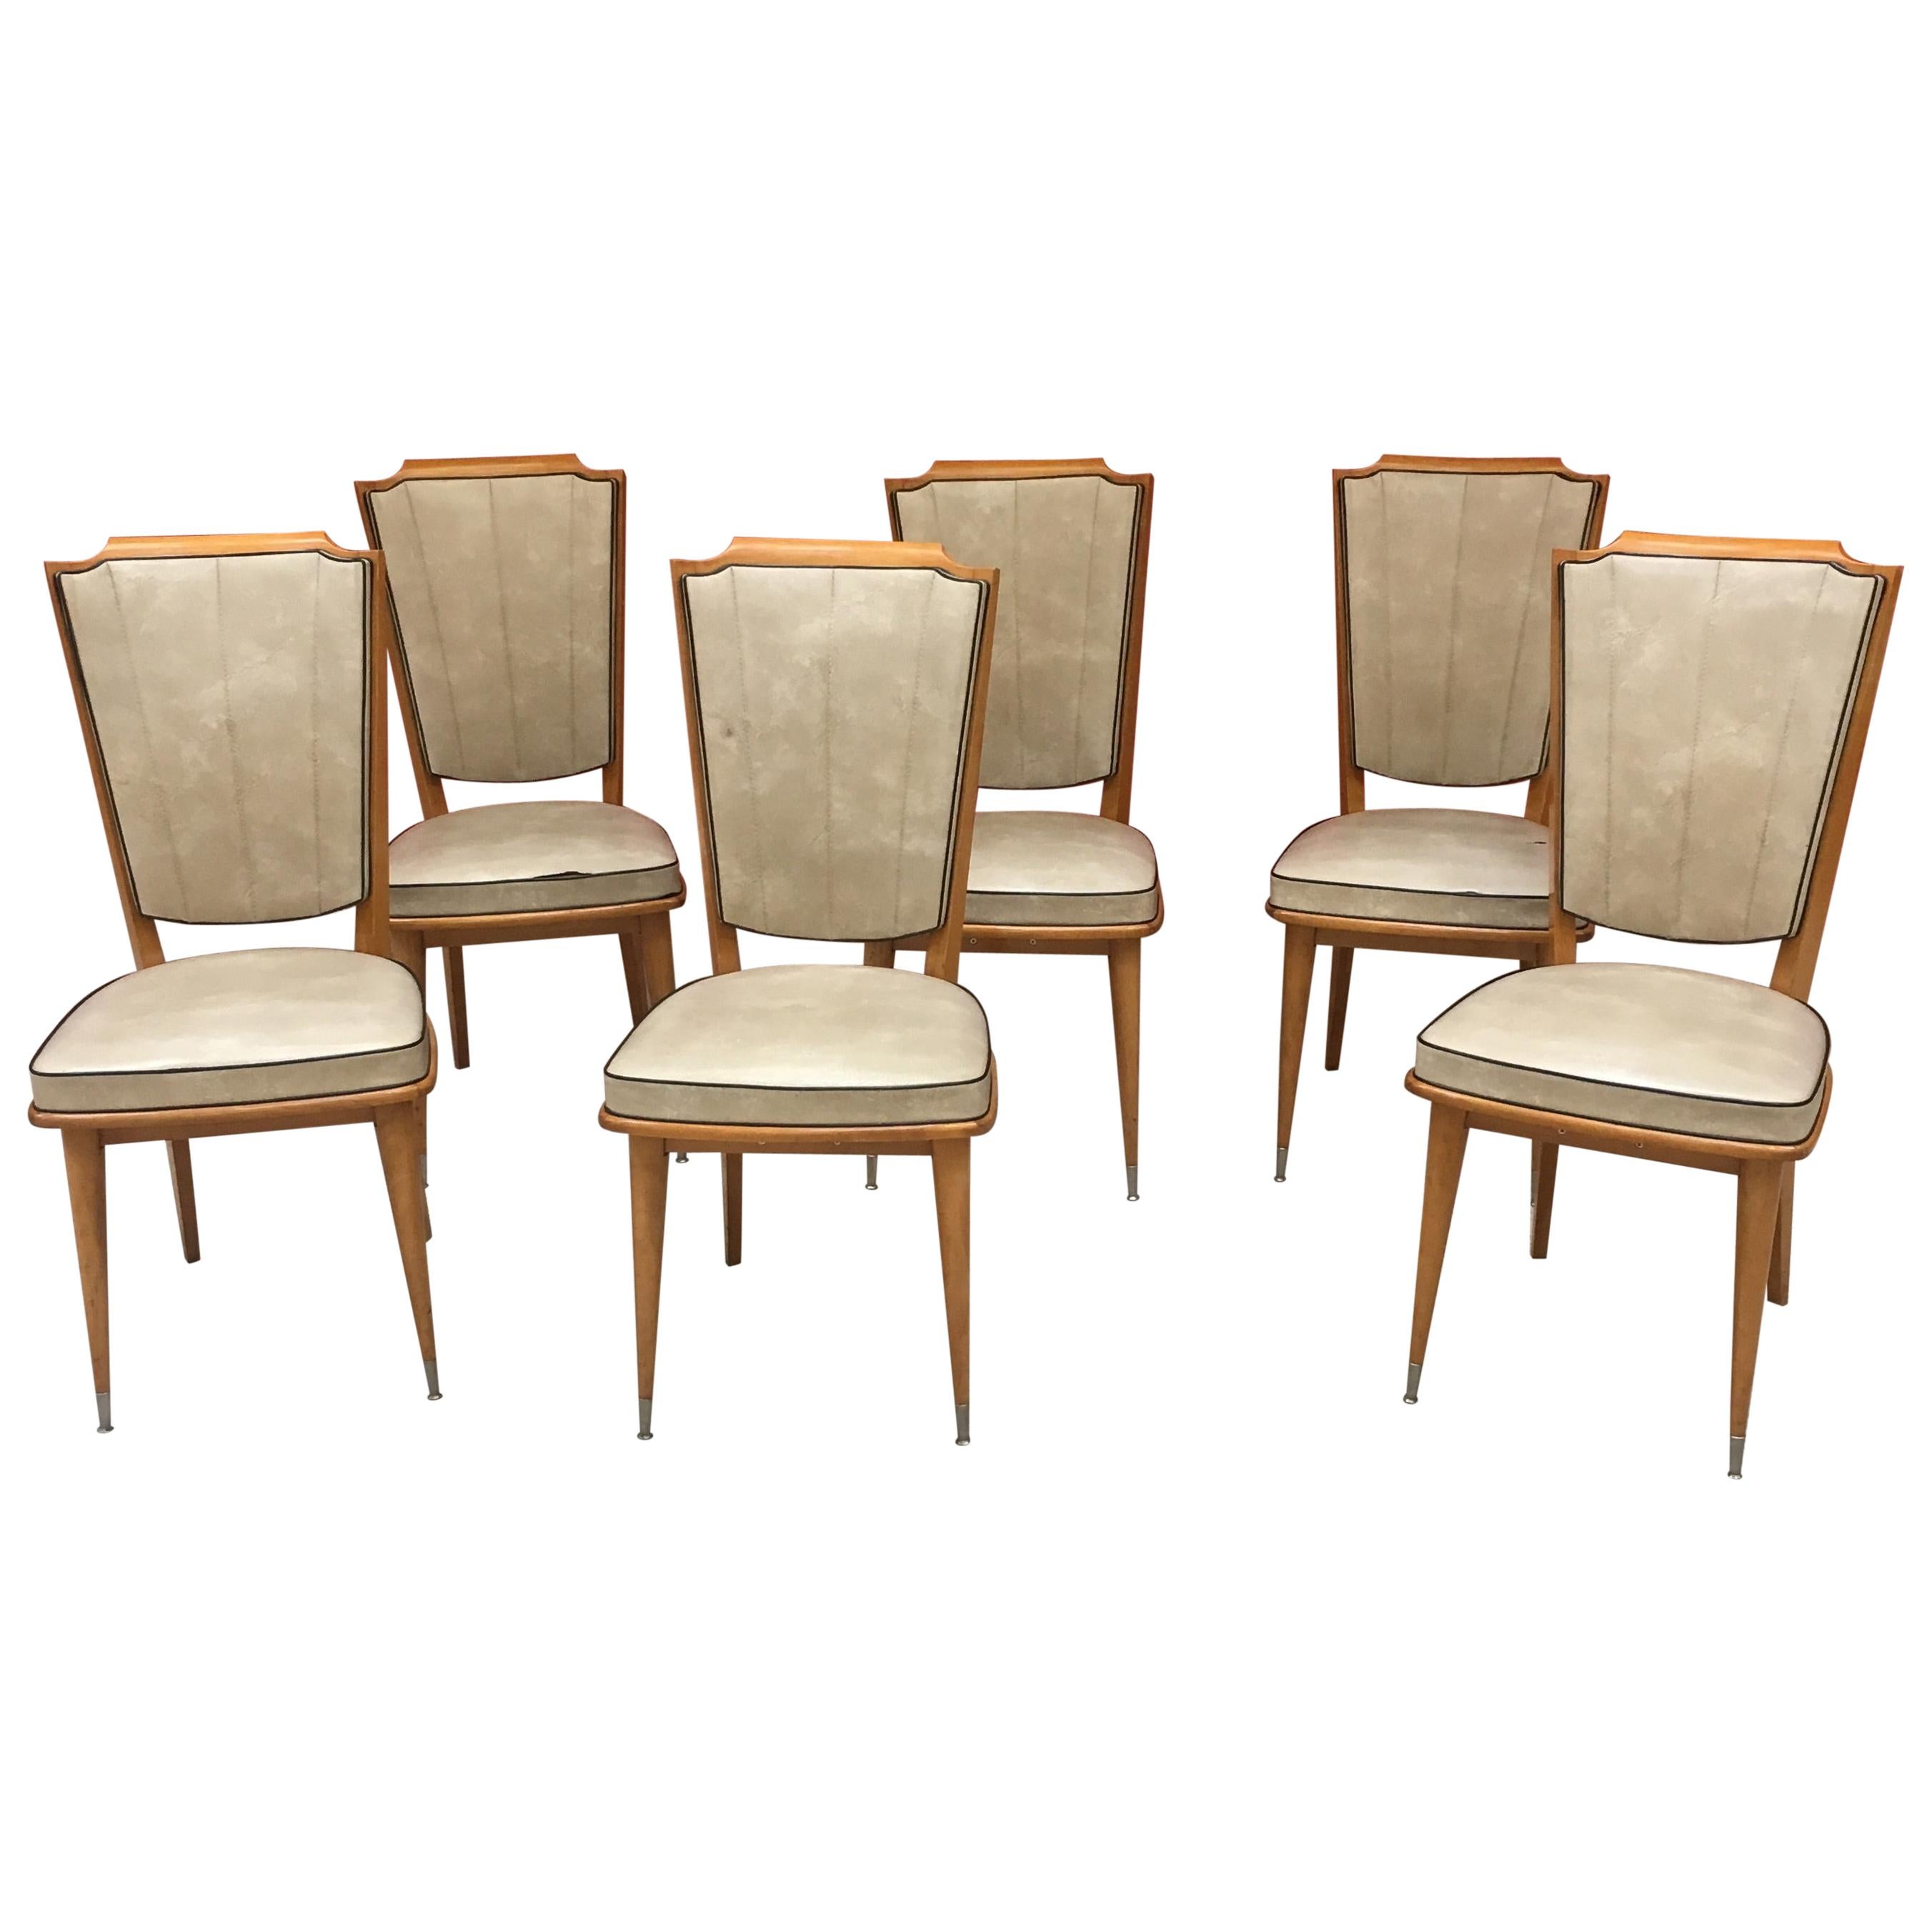 6 Typical French Chairs 1960